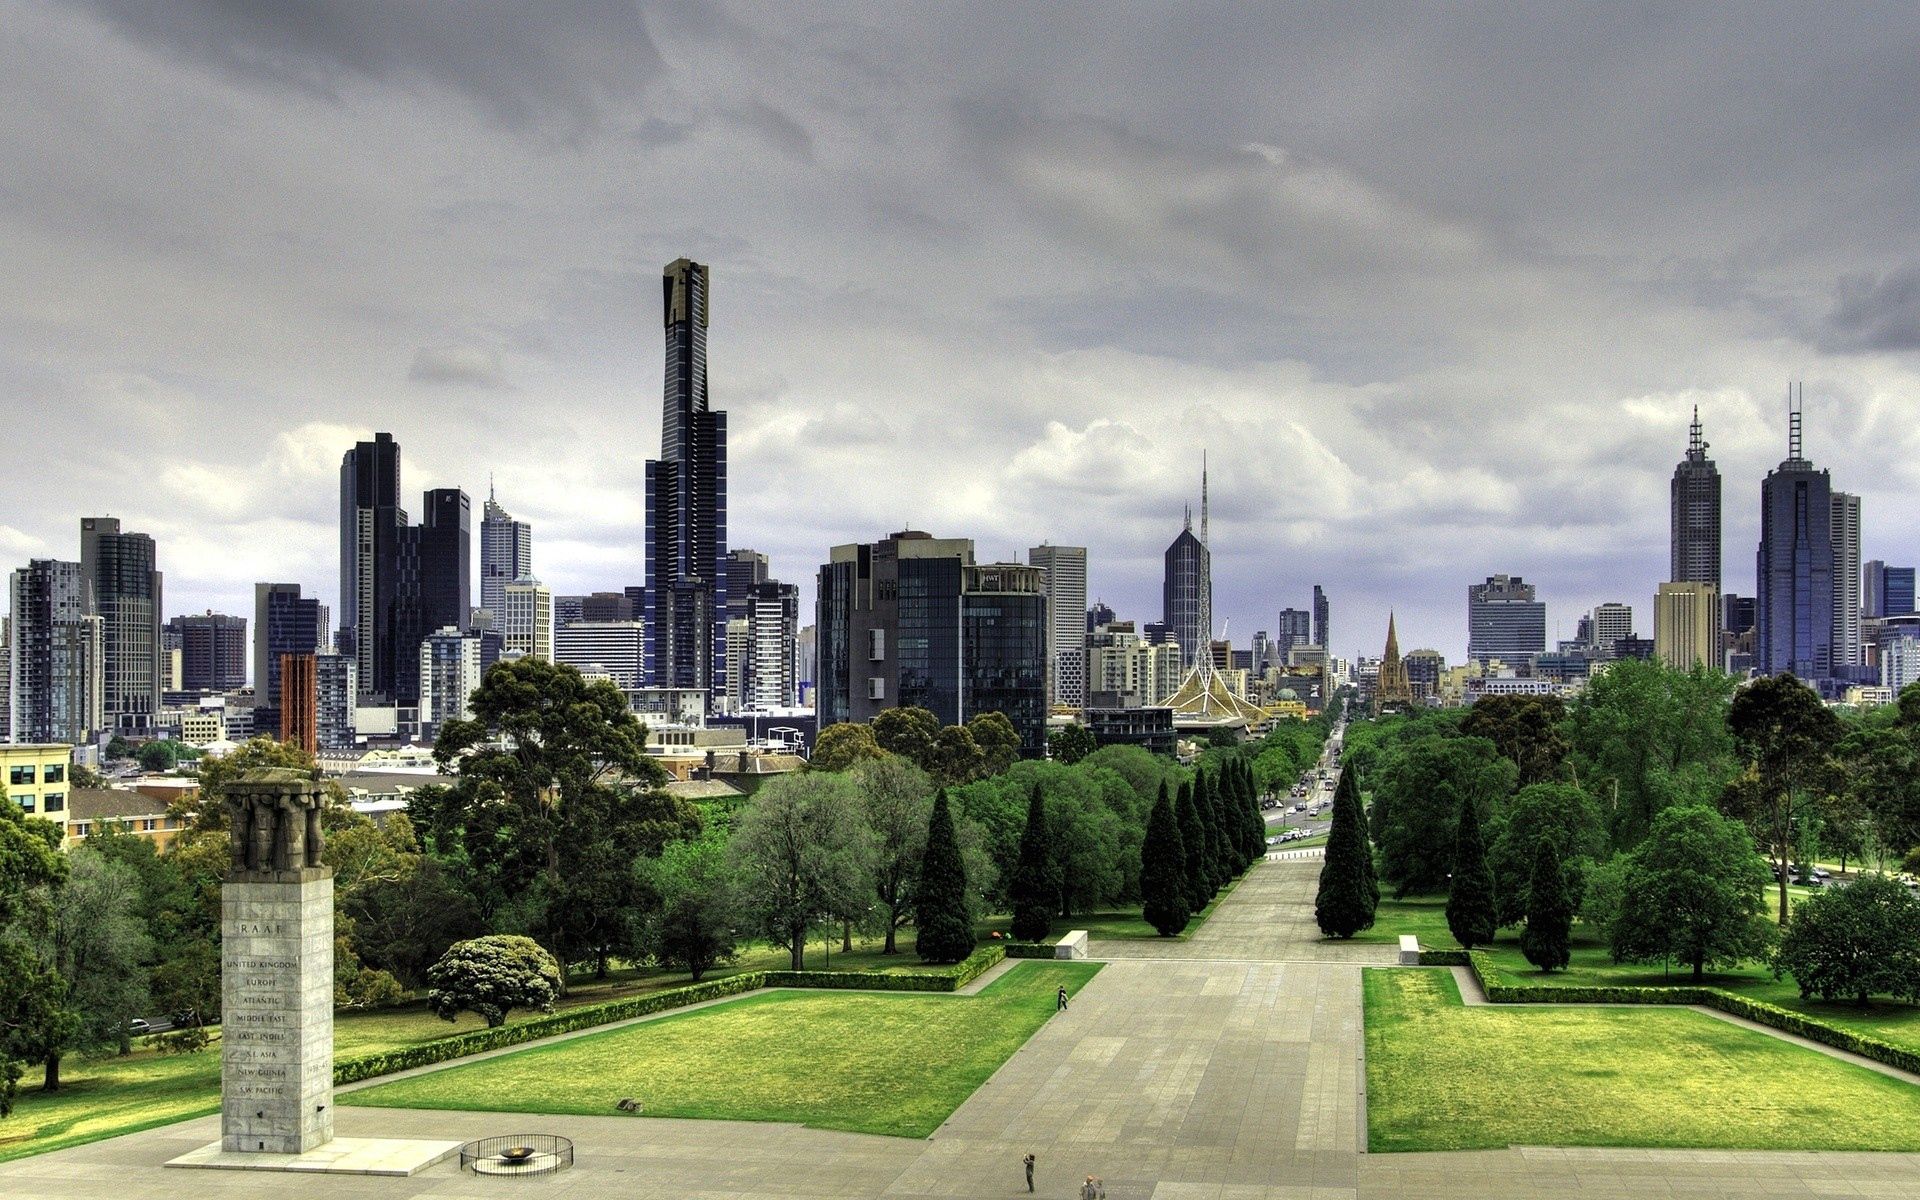 cities, australia, stroll, park, handsomely, nature, building, skyscrapers, it's beautiful, melbourne